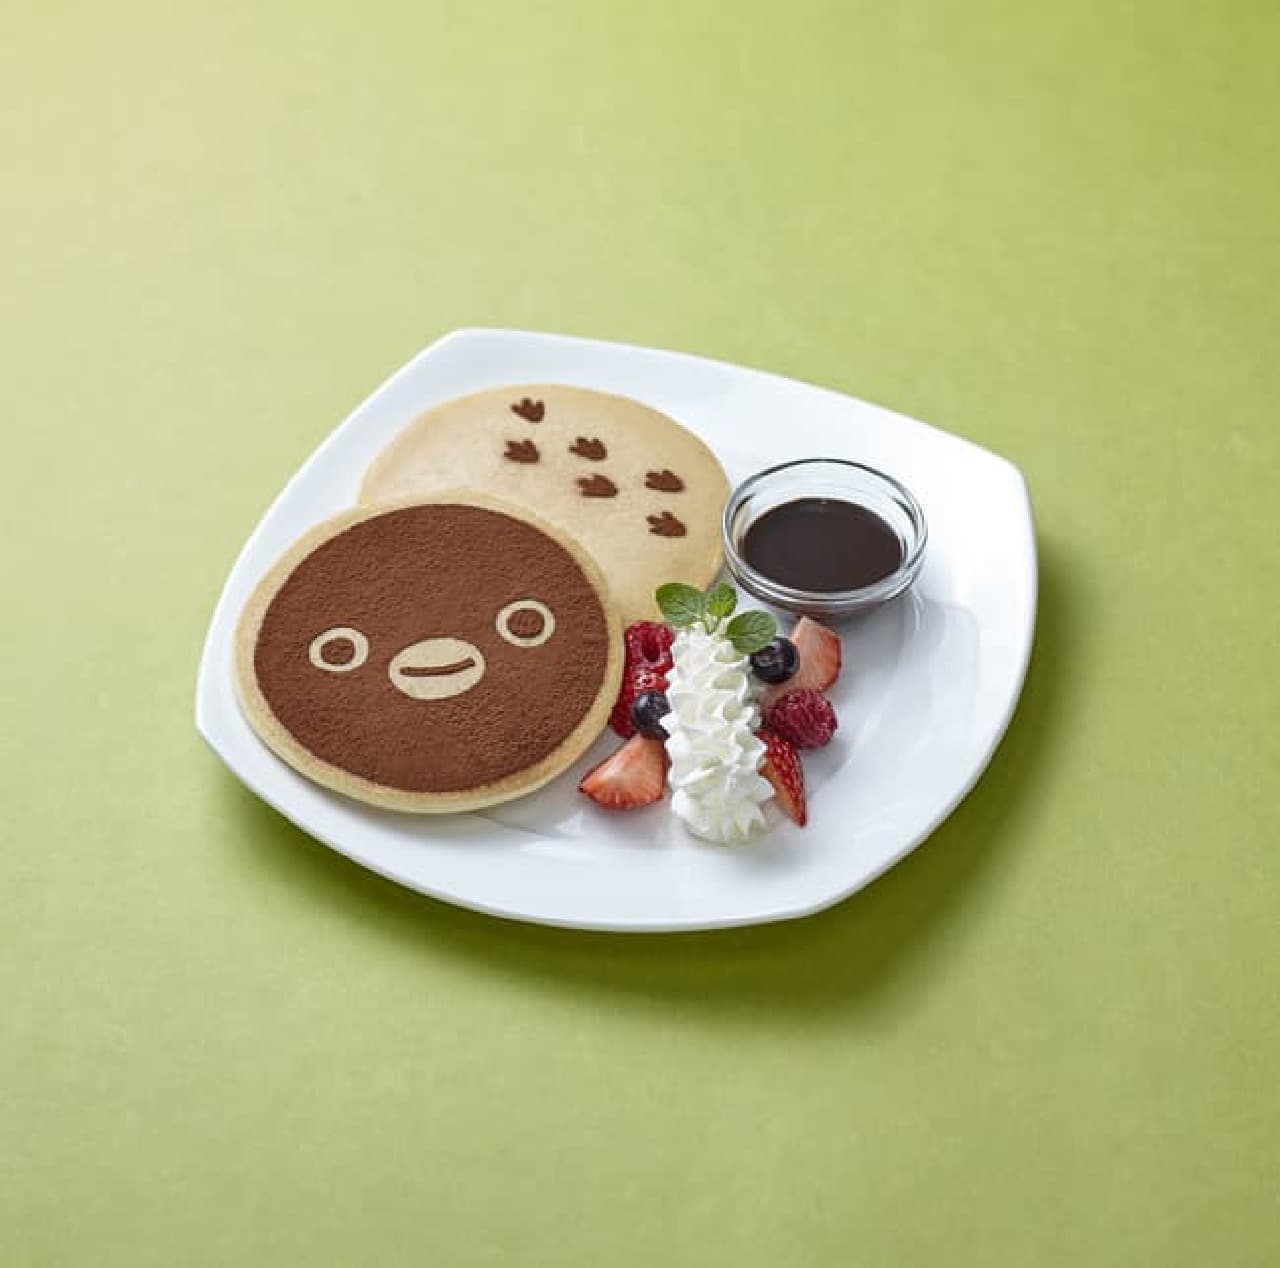 Suica's Penguin x Humming Cafe by Premy Colomy